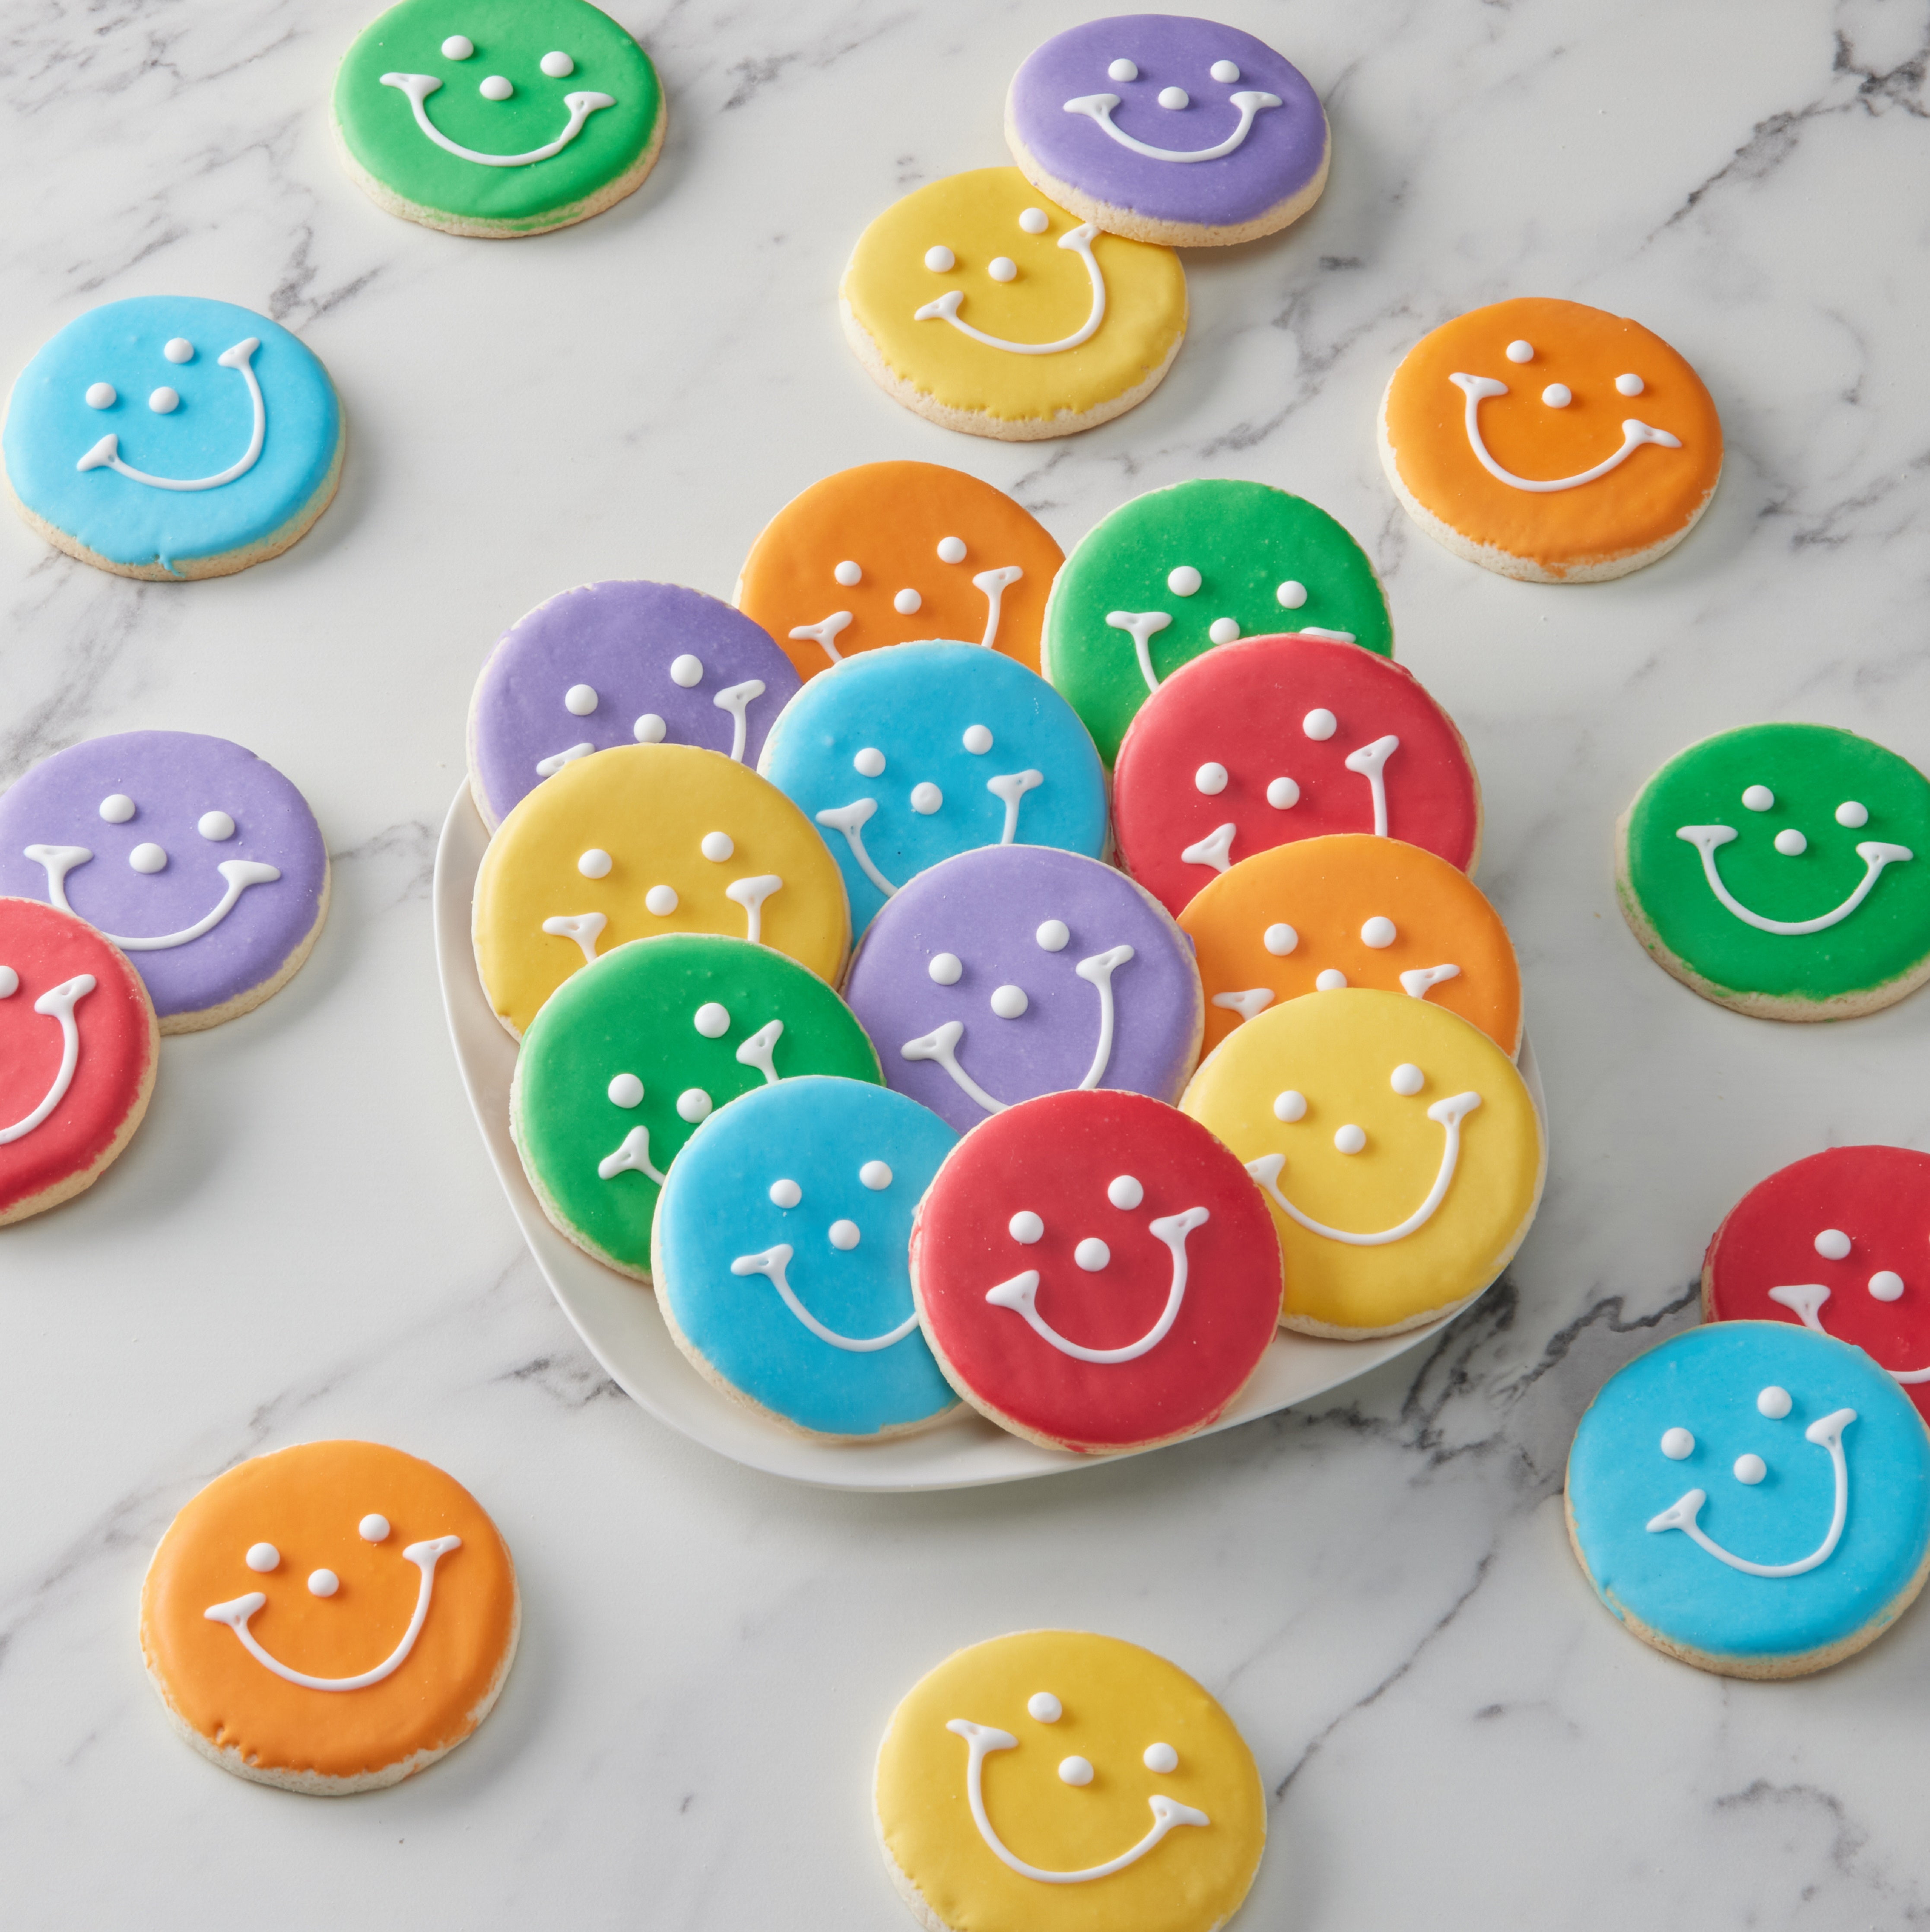 12-Pack White Iced Smiley Cookies - Nut Free, Kosher, Individually Wrapped  Sugar Cookies